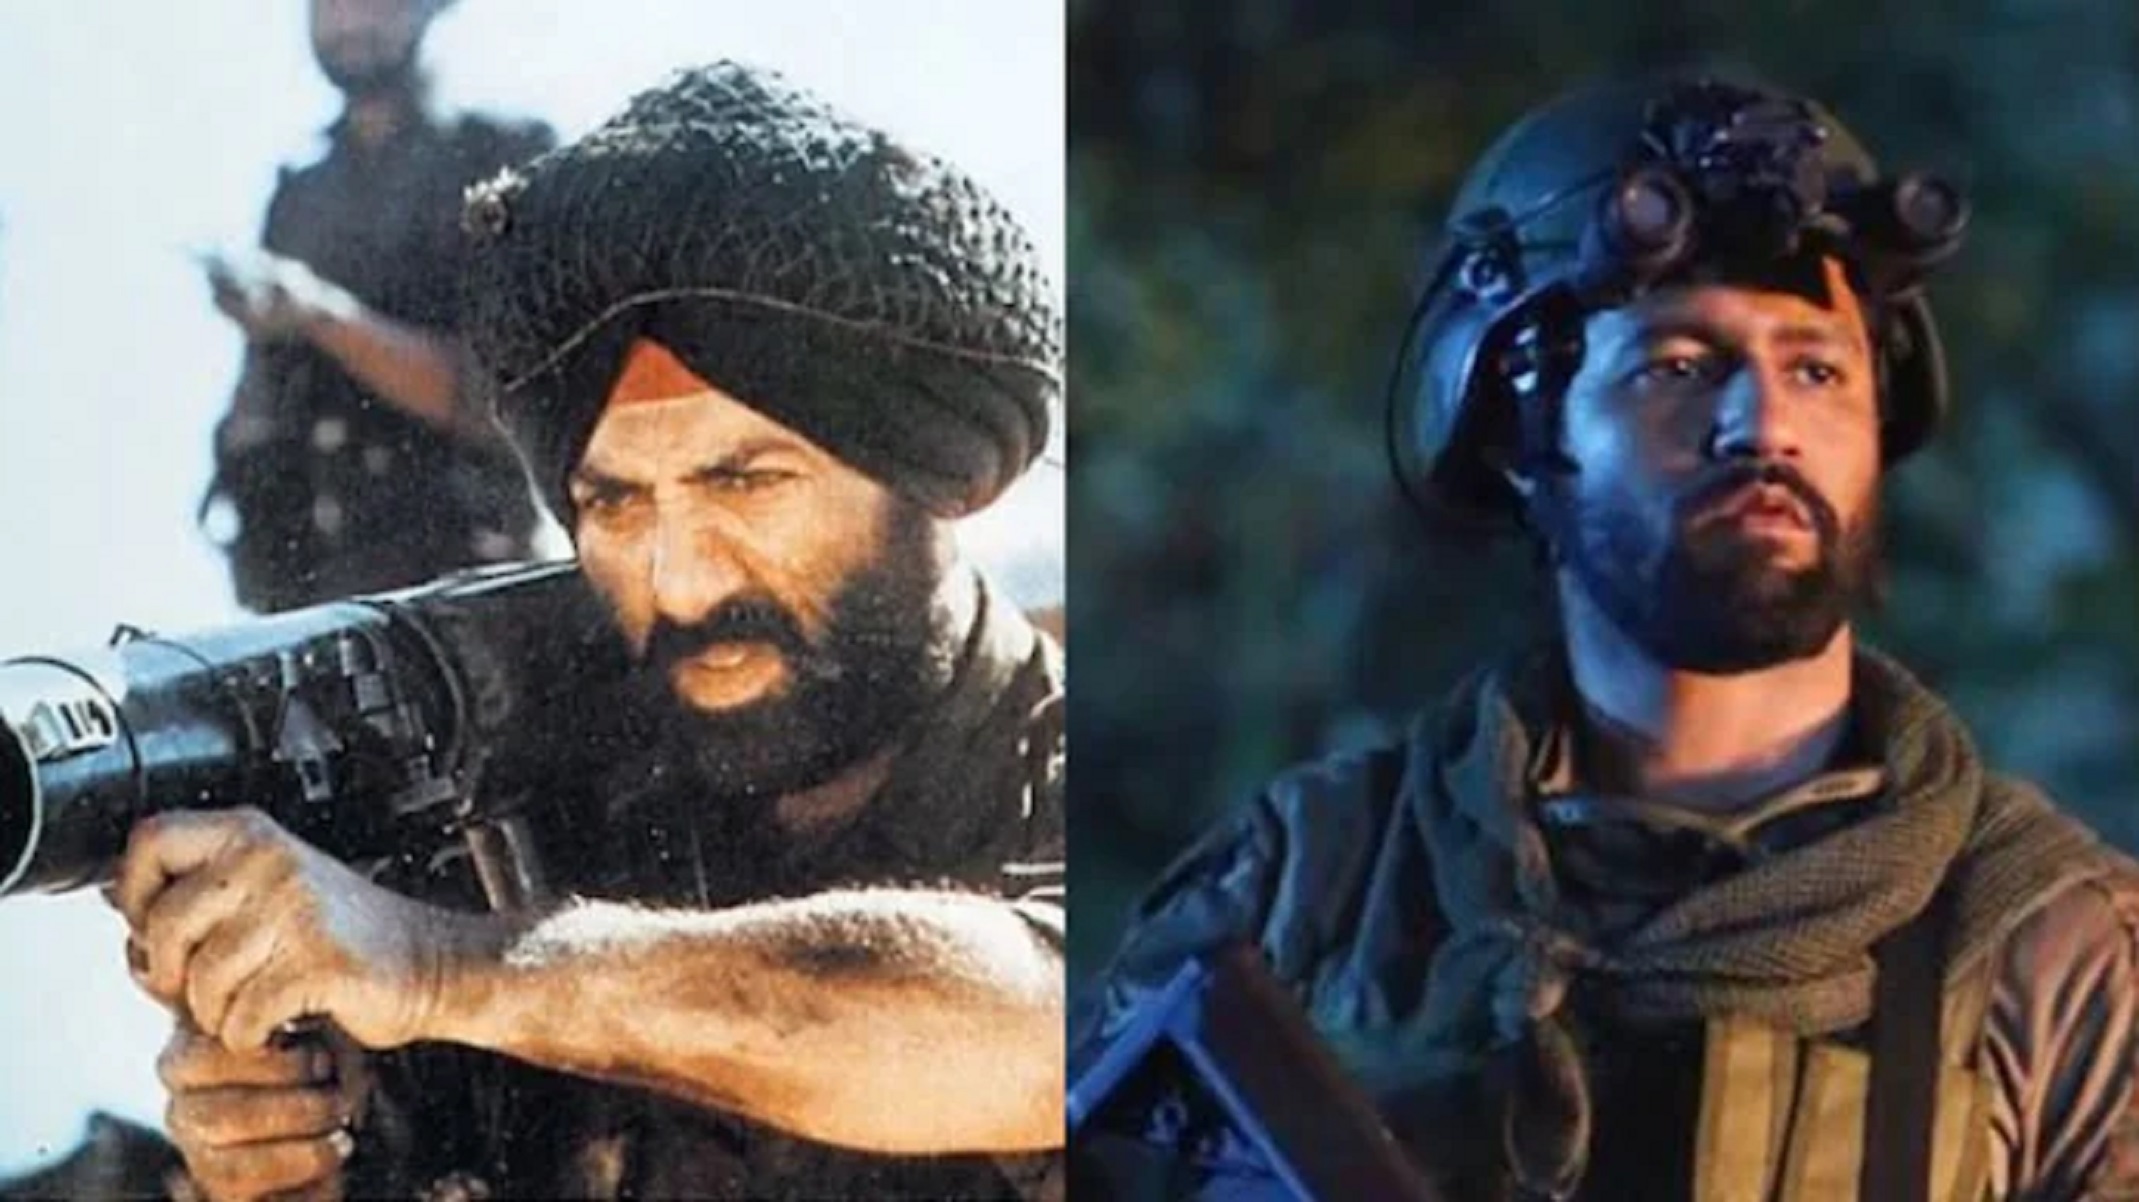 From Sunny Deol to Vicky Kaushal, Bollywood celebs pay tribute to Indian army soldiers on army day